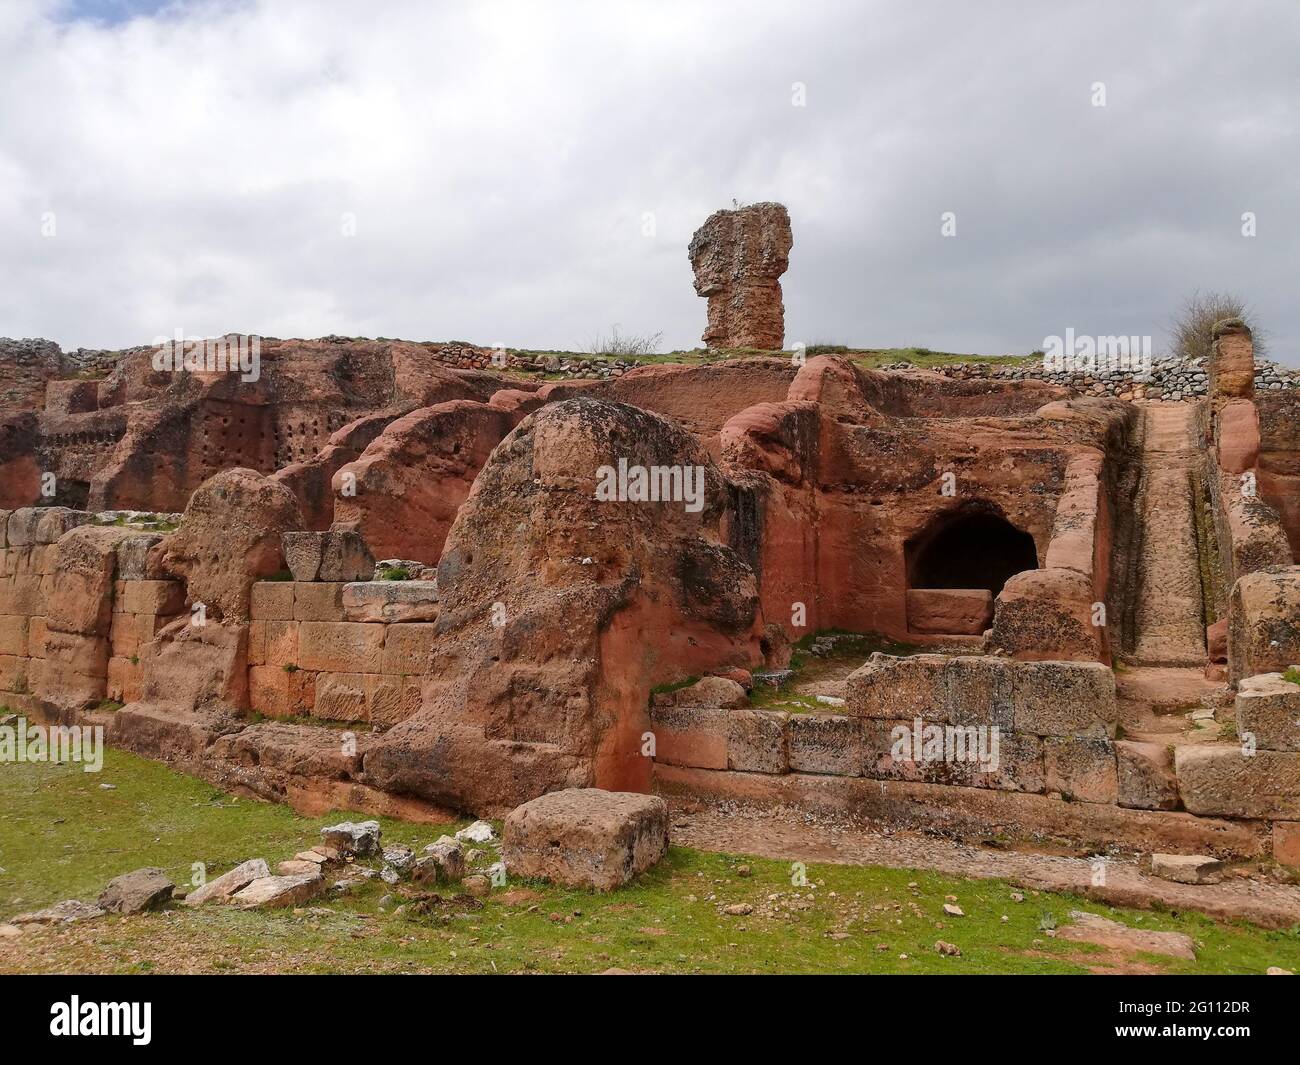 Discovered ruins of an ancient Roman civilization in Montejo de Tiermes, Soria on a cloudy day Stock Photo